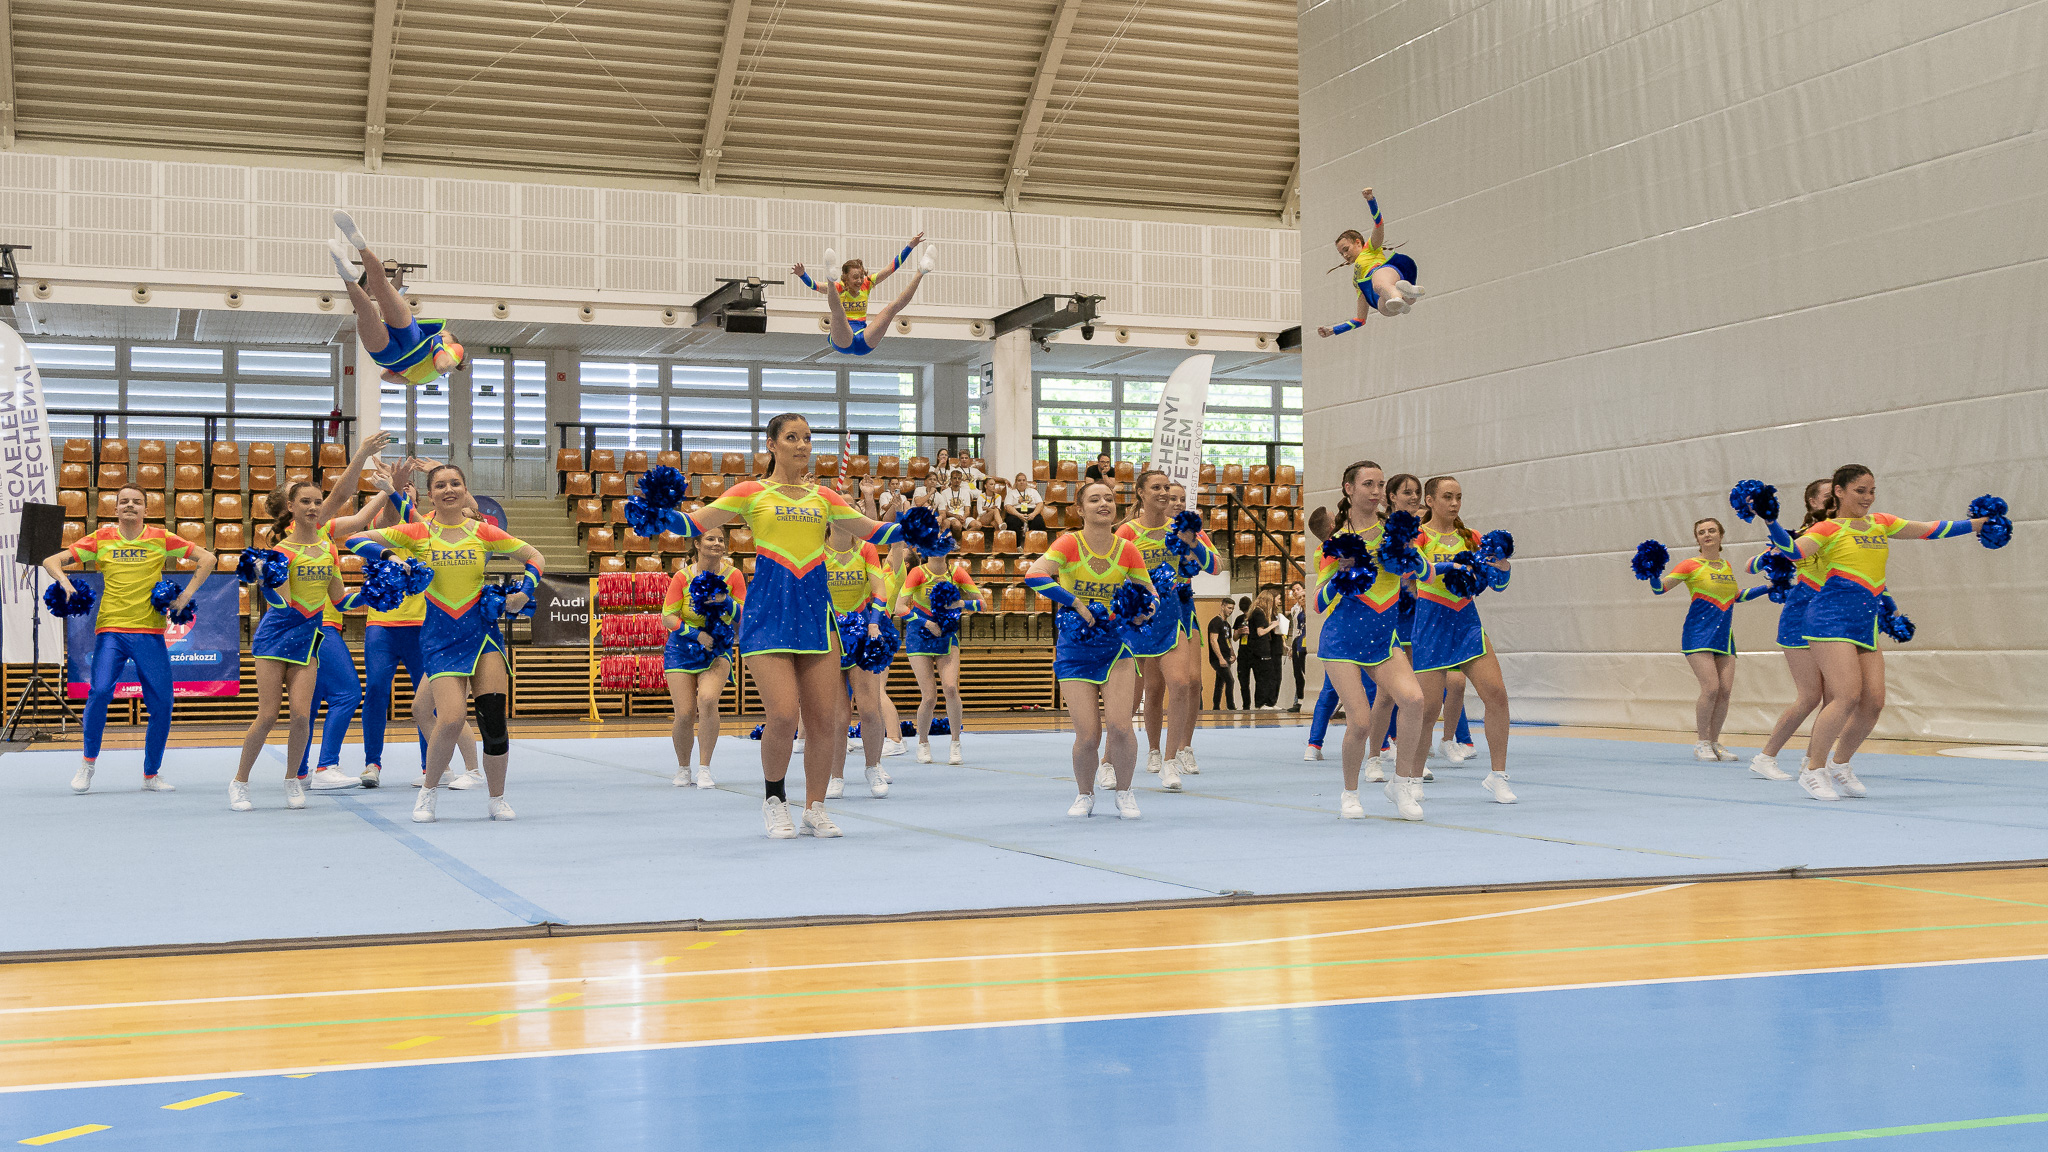 The MEFOB Festival in Győr was characterized by high quality, sport competitions